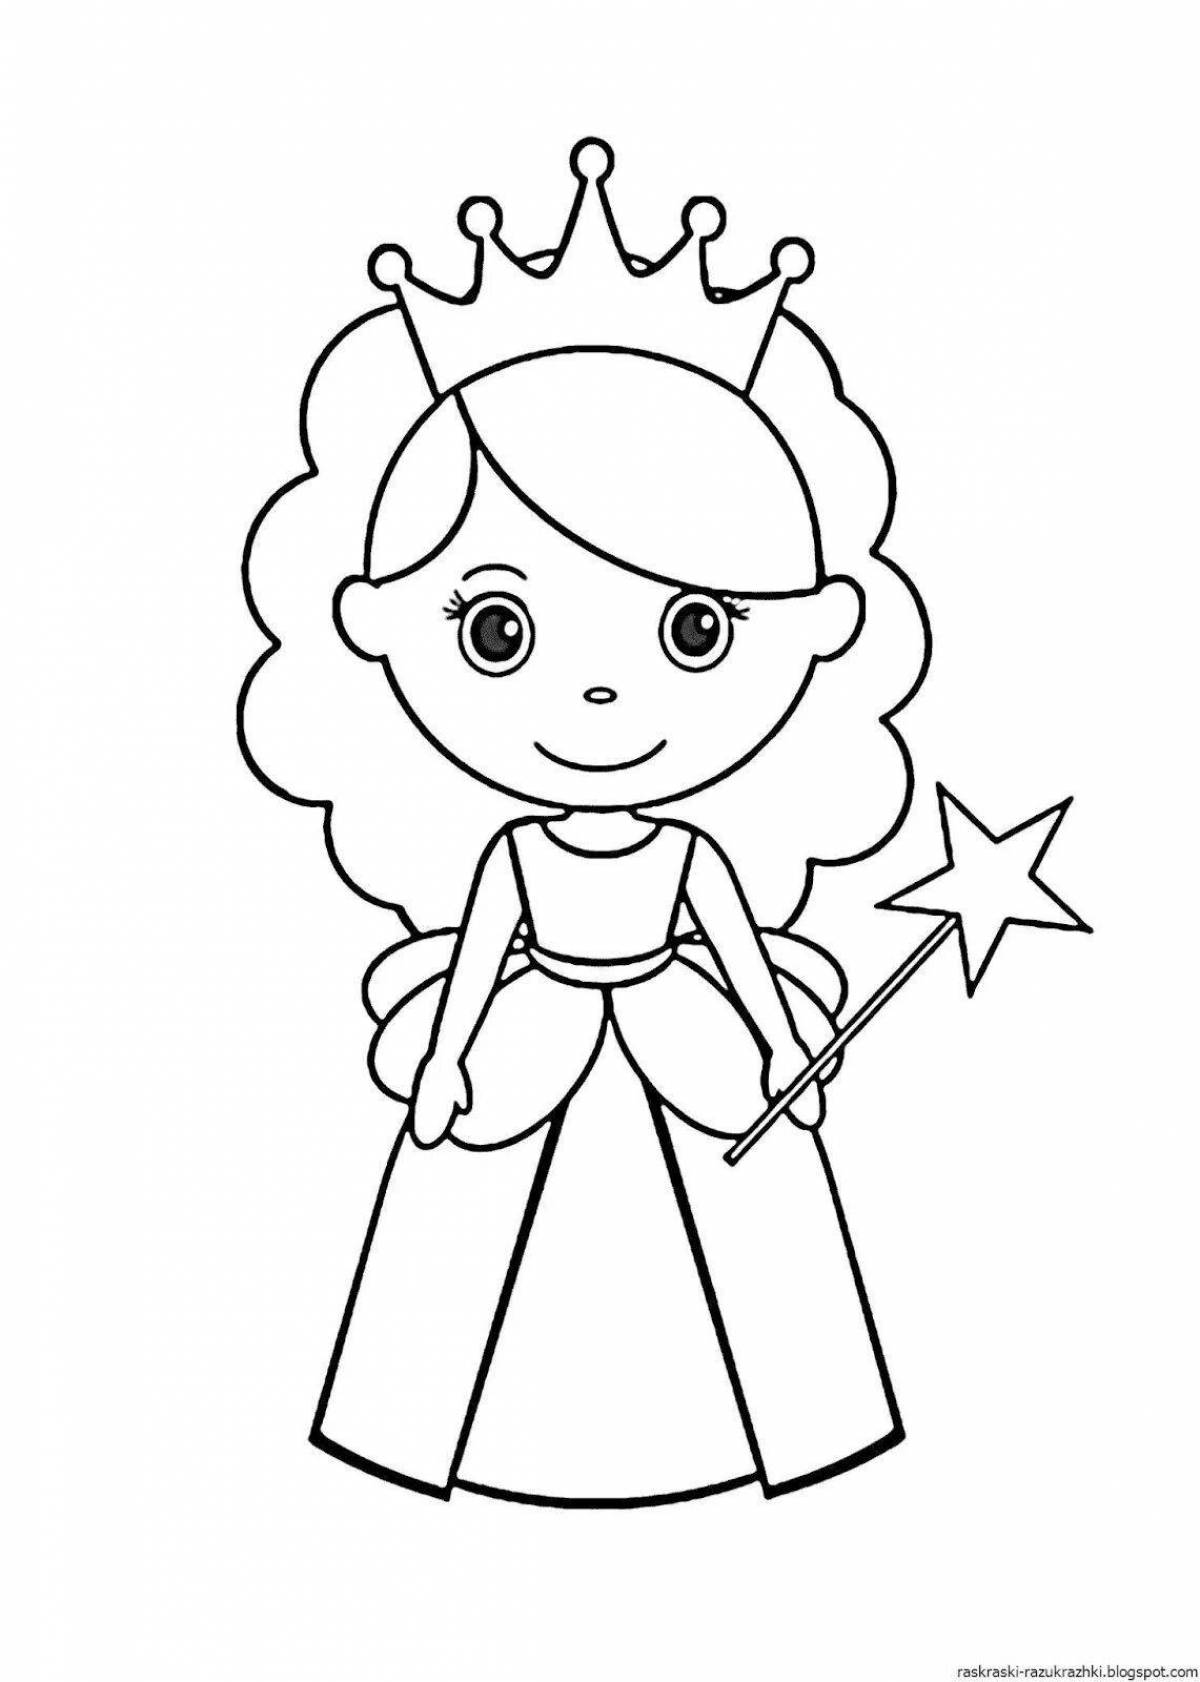 Great coloring for princess dolls